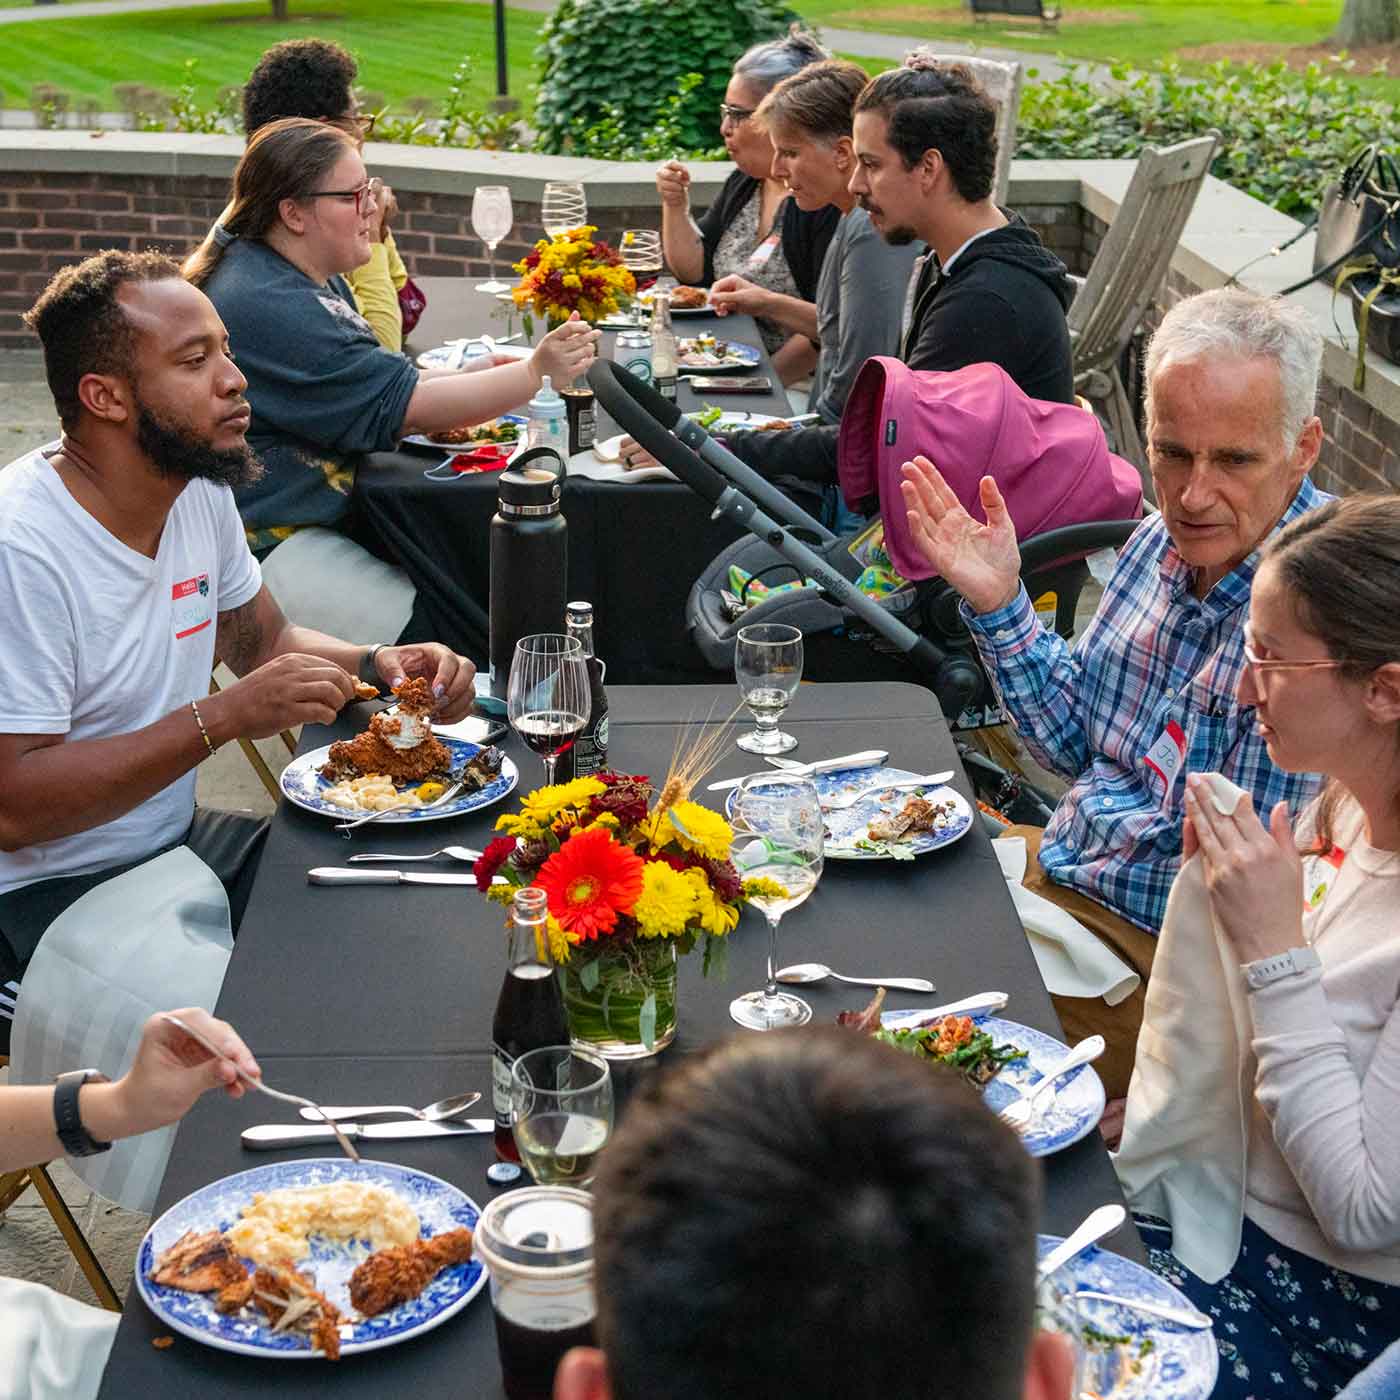 A group of people sit around an outdoor table with plates of food in front of them